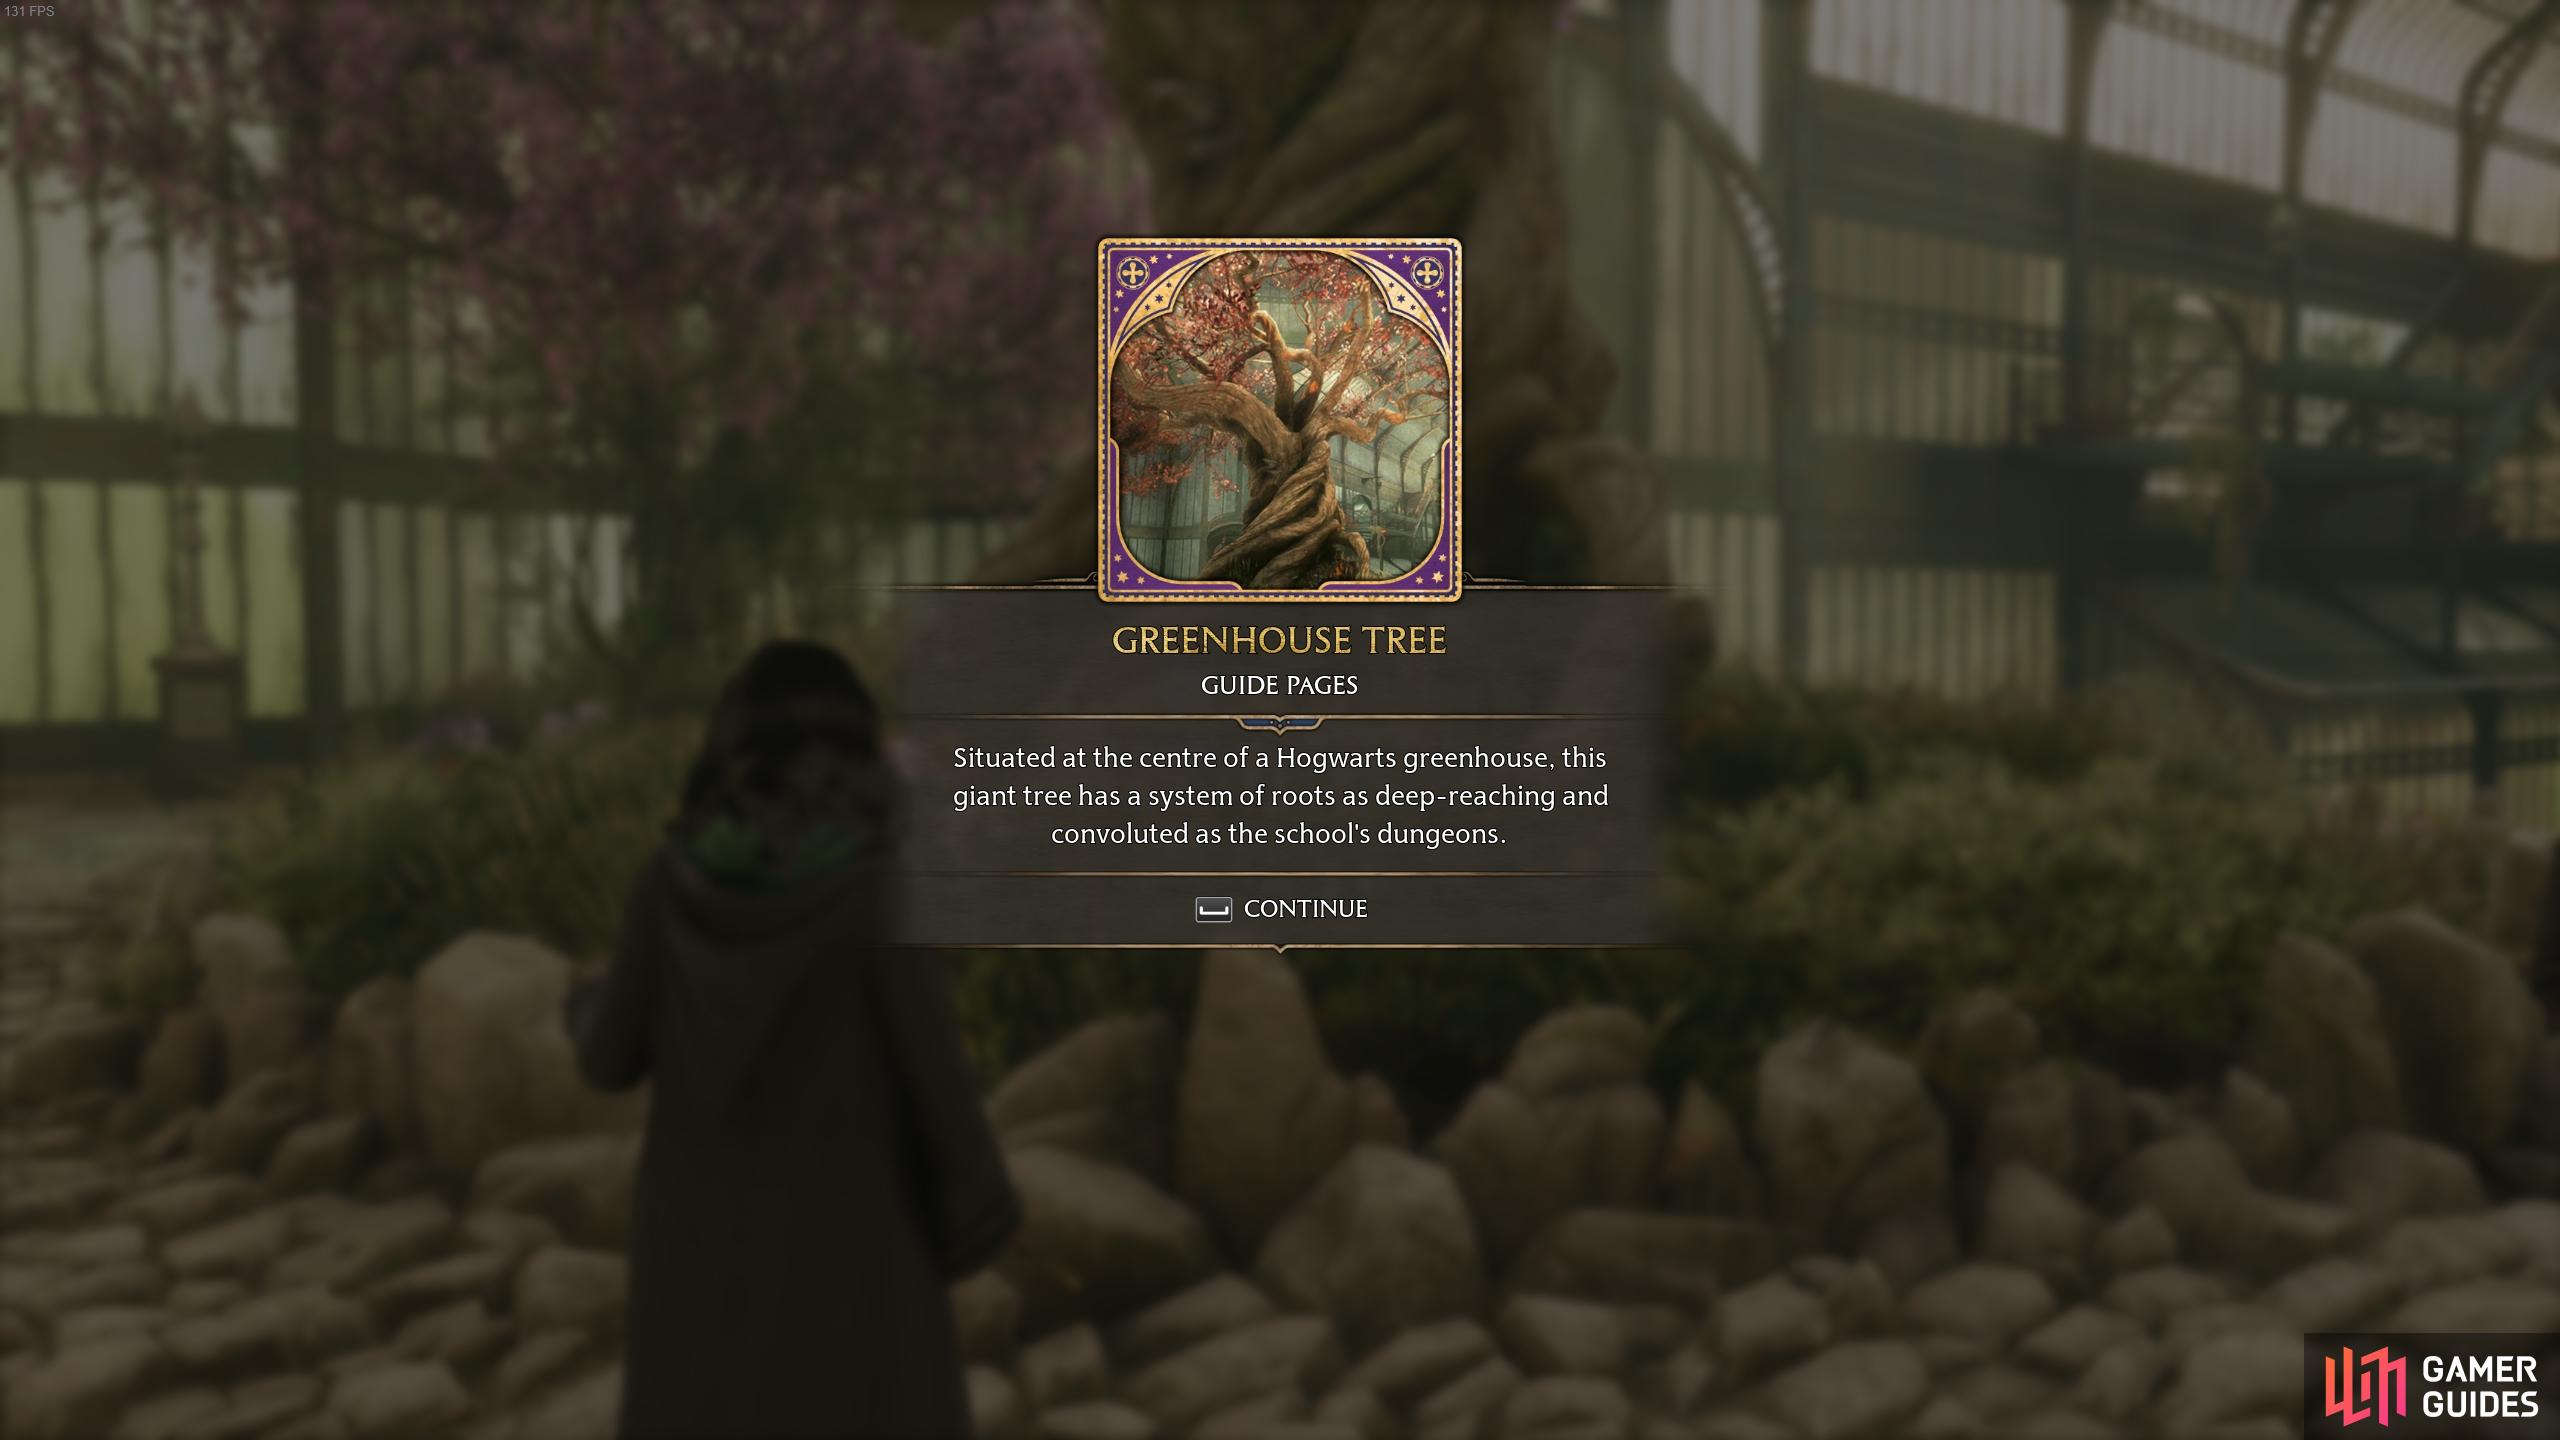 The description for the Greenhouse Tree page.